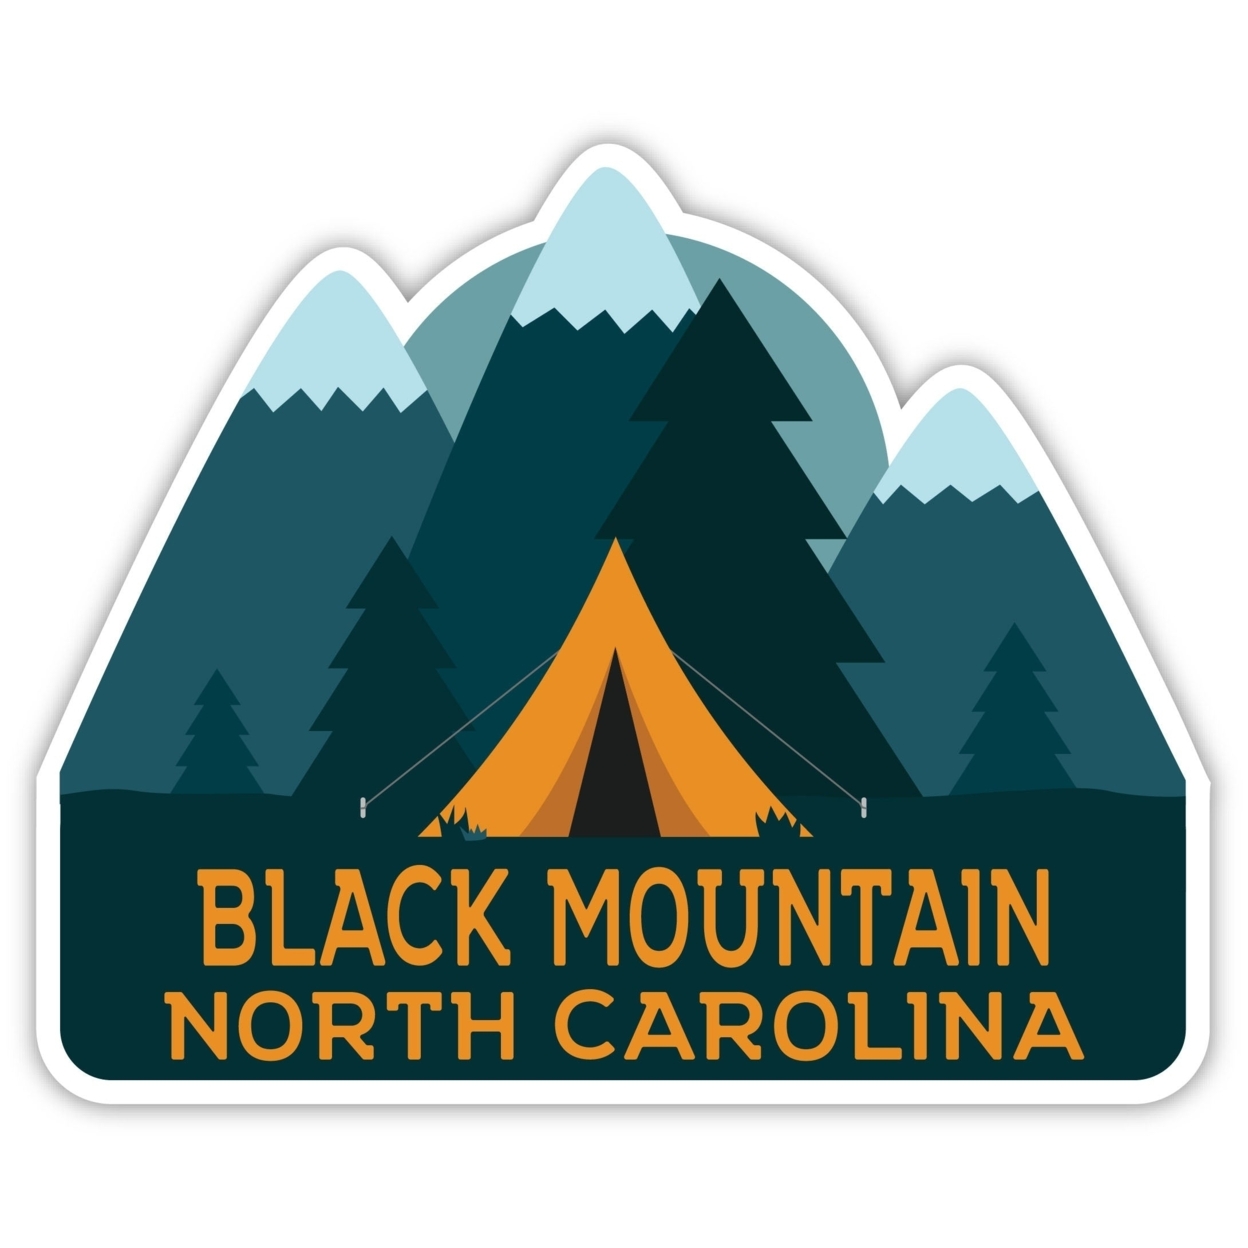 Black Mountain North Carolina Souvenir Decorative Stickers (Choose Theme And Size) - 4-Pack, 12-Inch, Tent